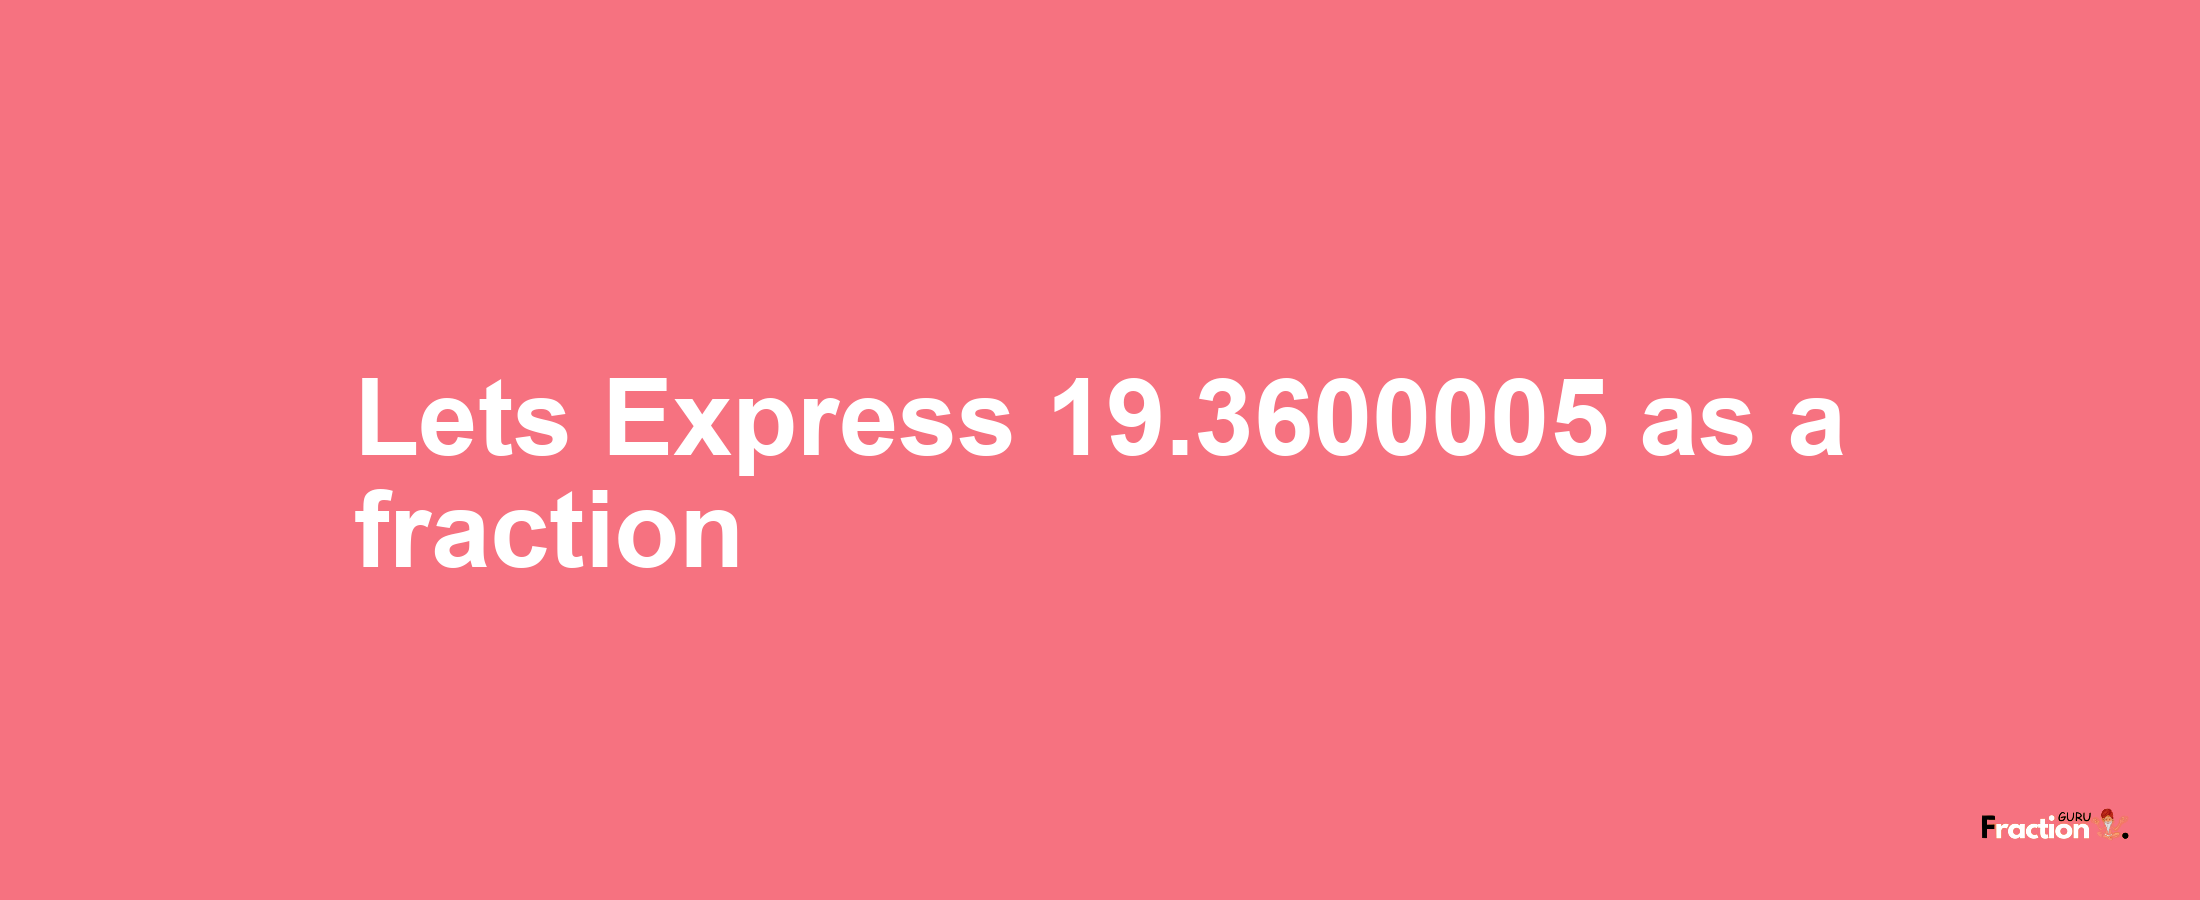 Lets Express 19.3600005 as afraction